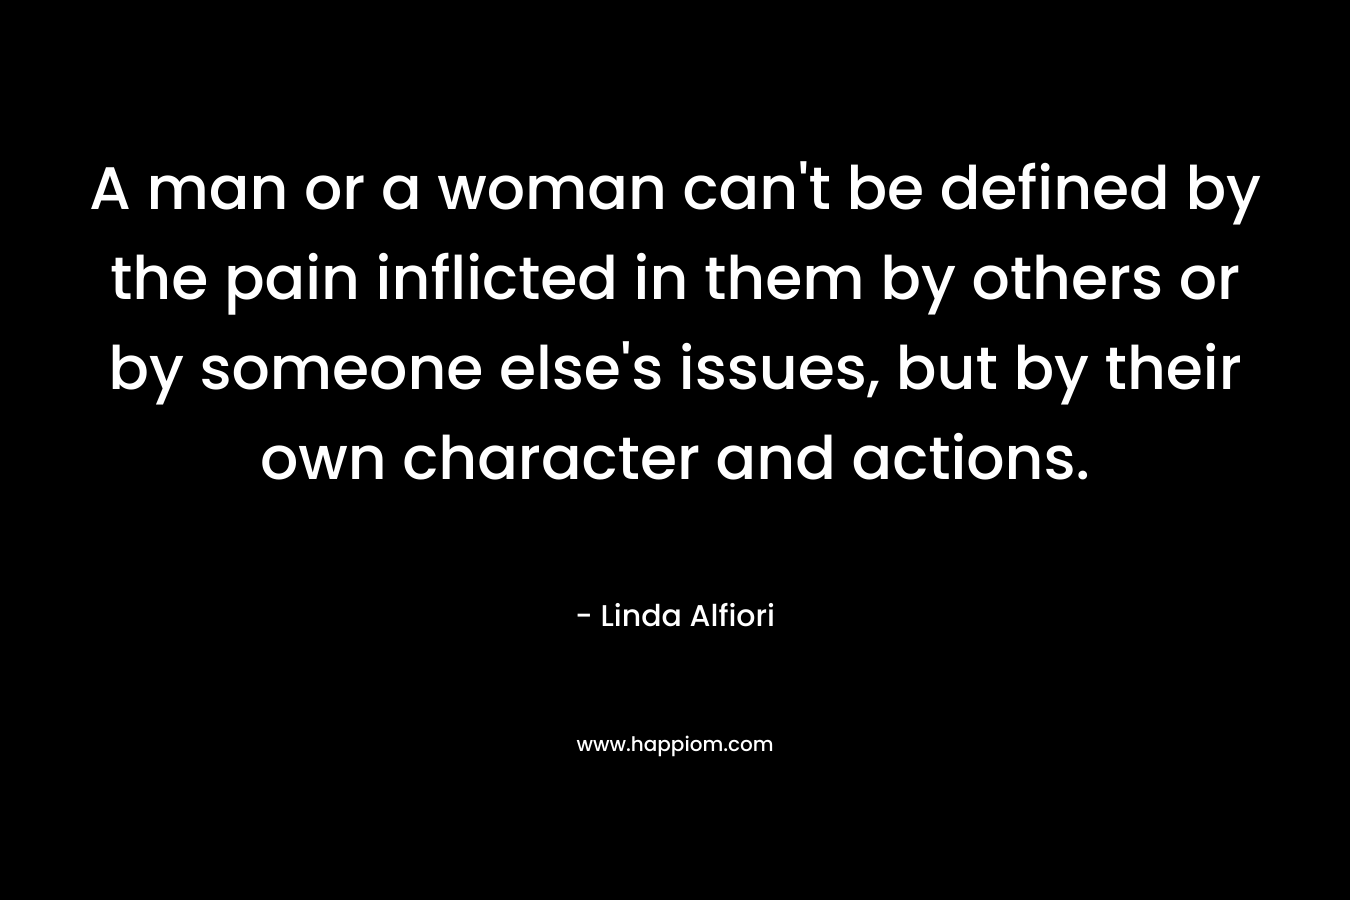 A man or a woman can’t be defined by the pain inflicted in them by others or by someone else’s issues, but by their own character and actions. – Linda Alfiori